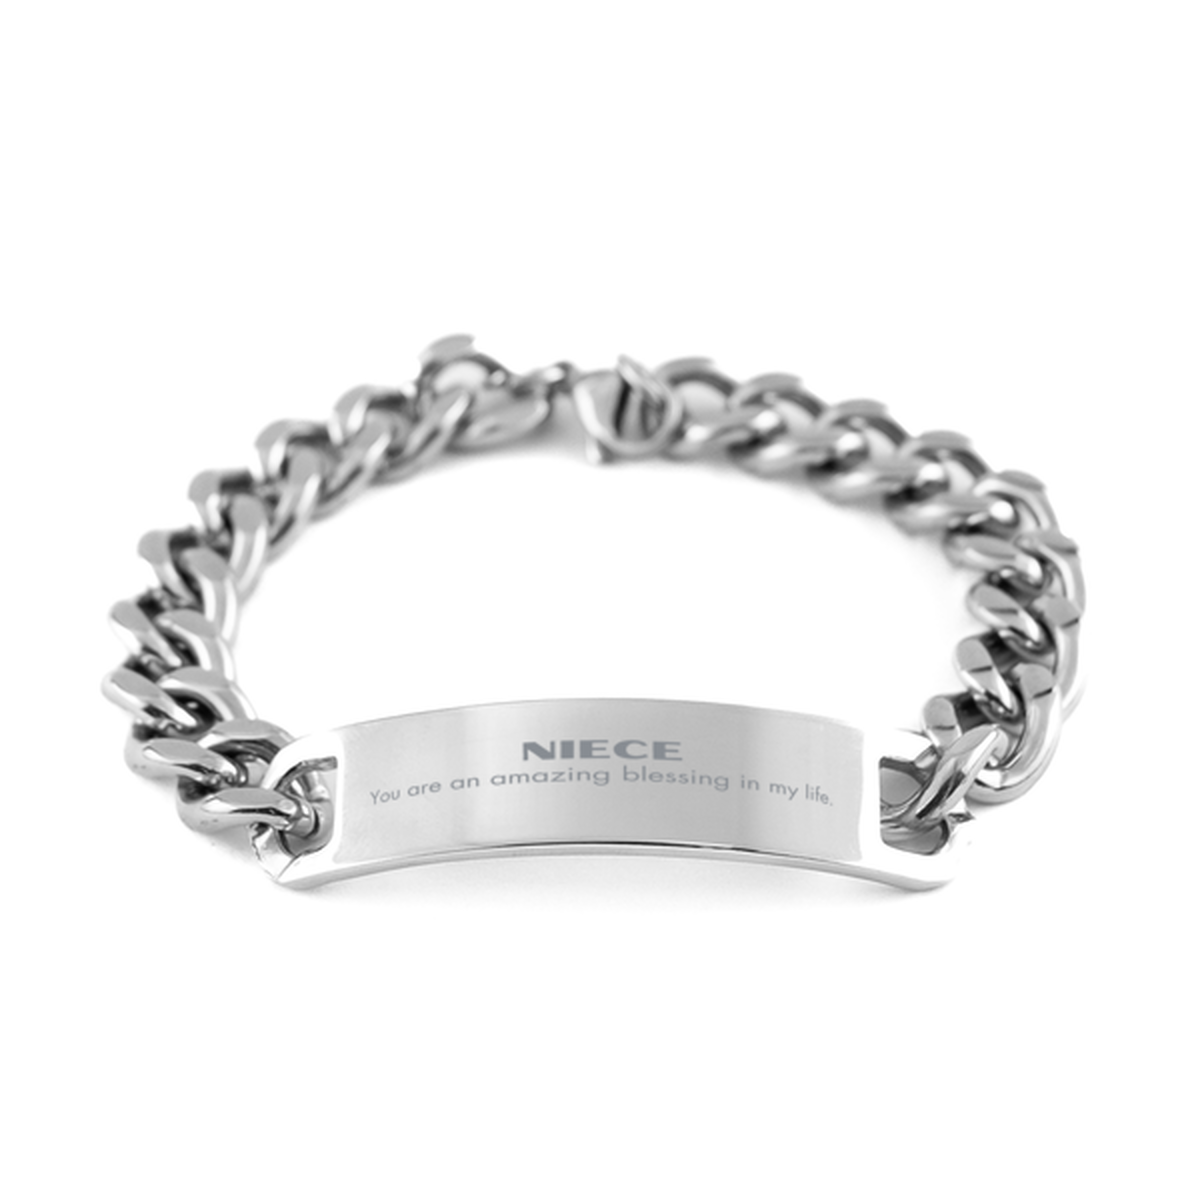 Niece Cuban Chain Stainless Steel Bracelet, You are an amazing blessing in my life, Thank You Gifts For Niece, Inspirational Birthday Christmas Unique Gifts For Niece